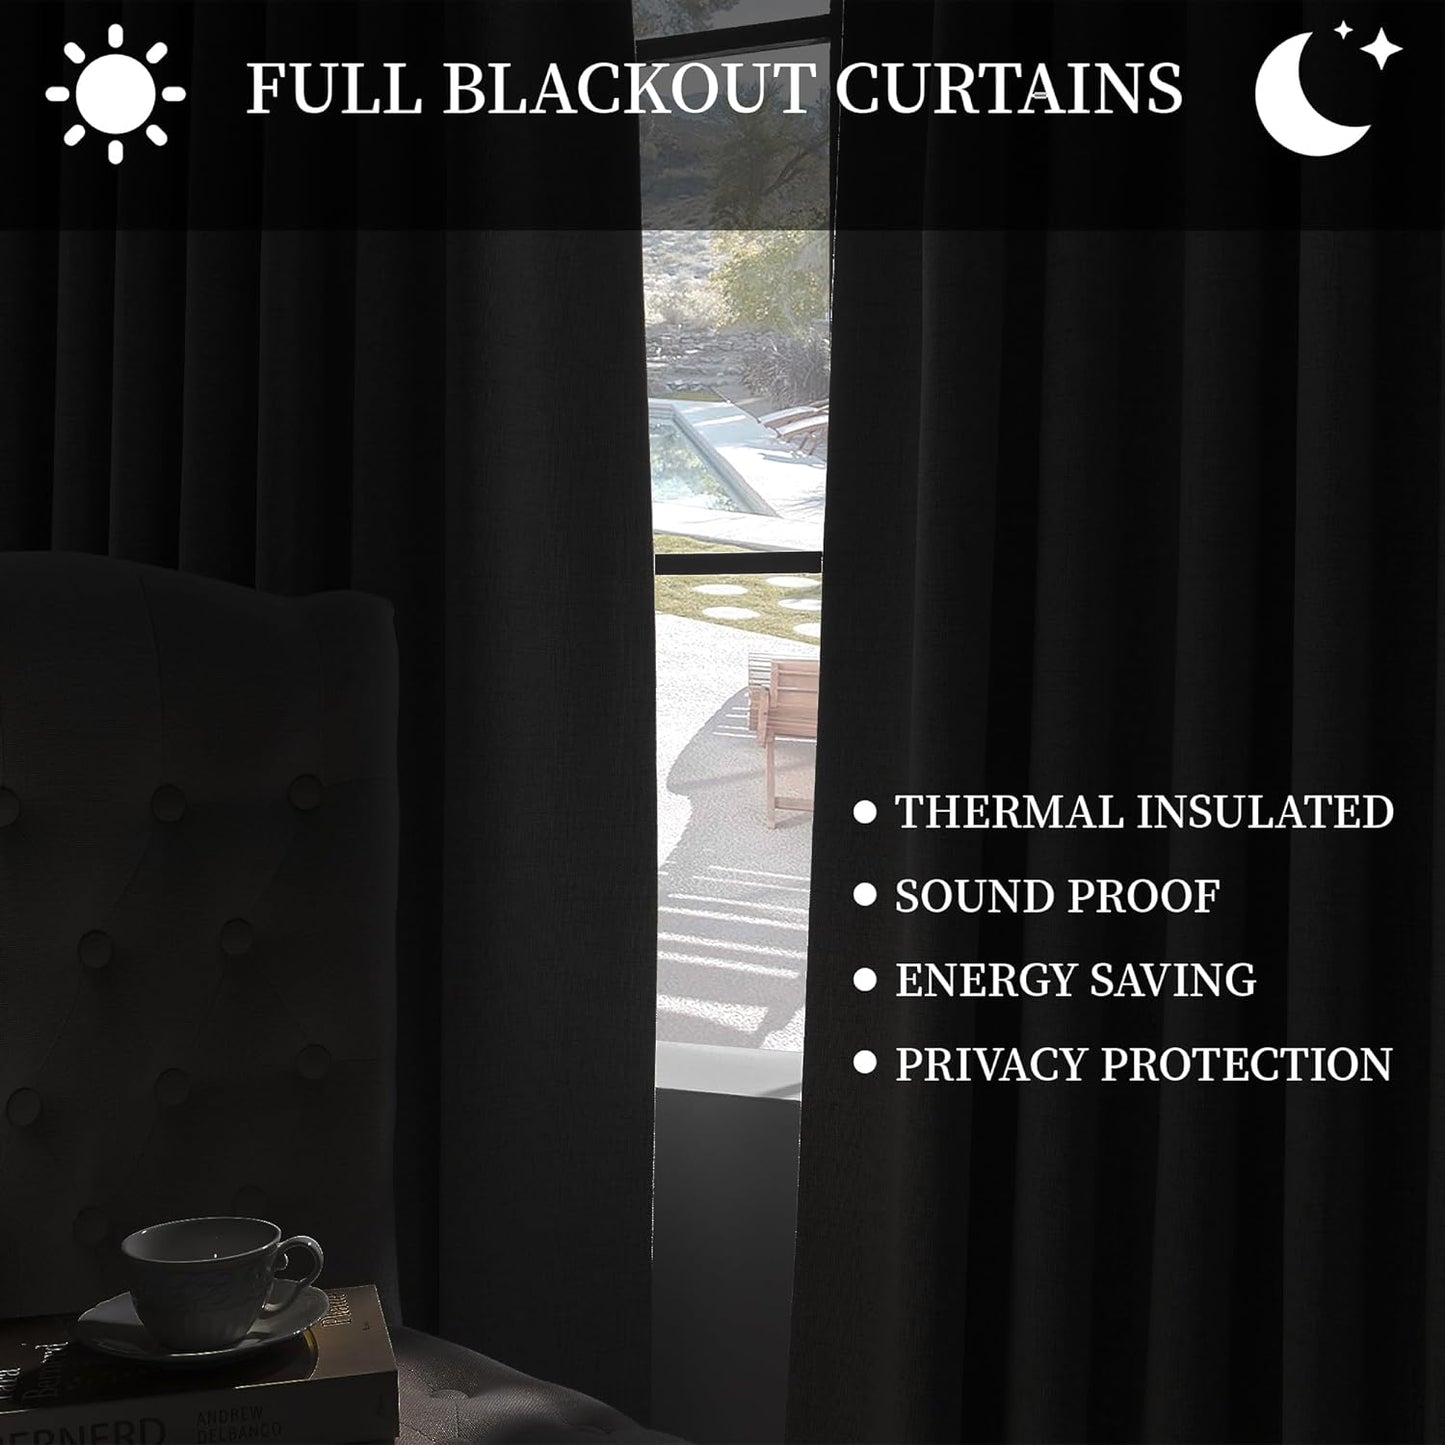 Full Blackout Curtains Back Tab Pinch Pleat Curtains 108 Inches Long for Living Room, Natural Linen Blended Thermal Insulated Patio Door Pleated Drapes with Hooks, 40" W X 108" L, 1 Panel  Cniuyhi   